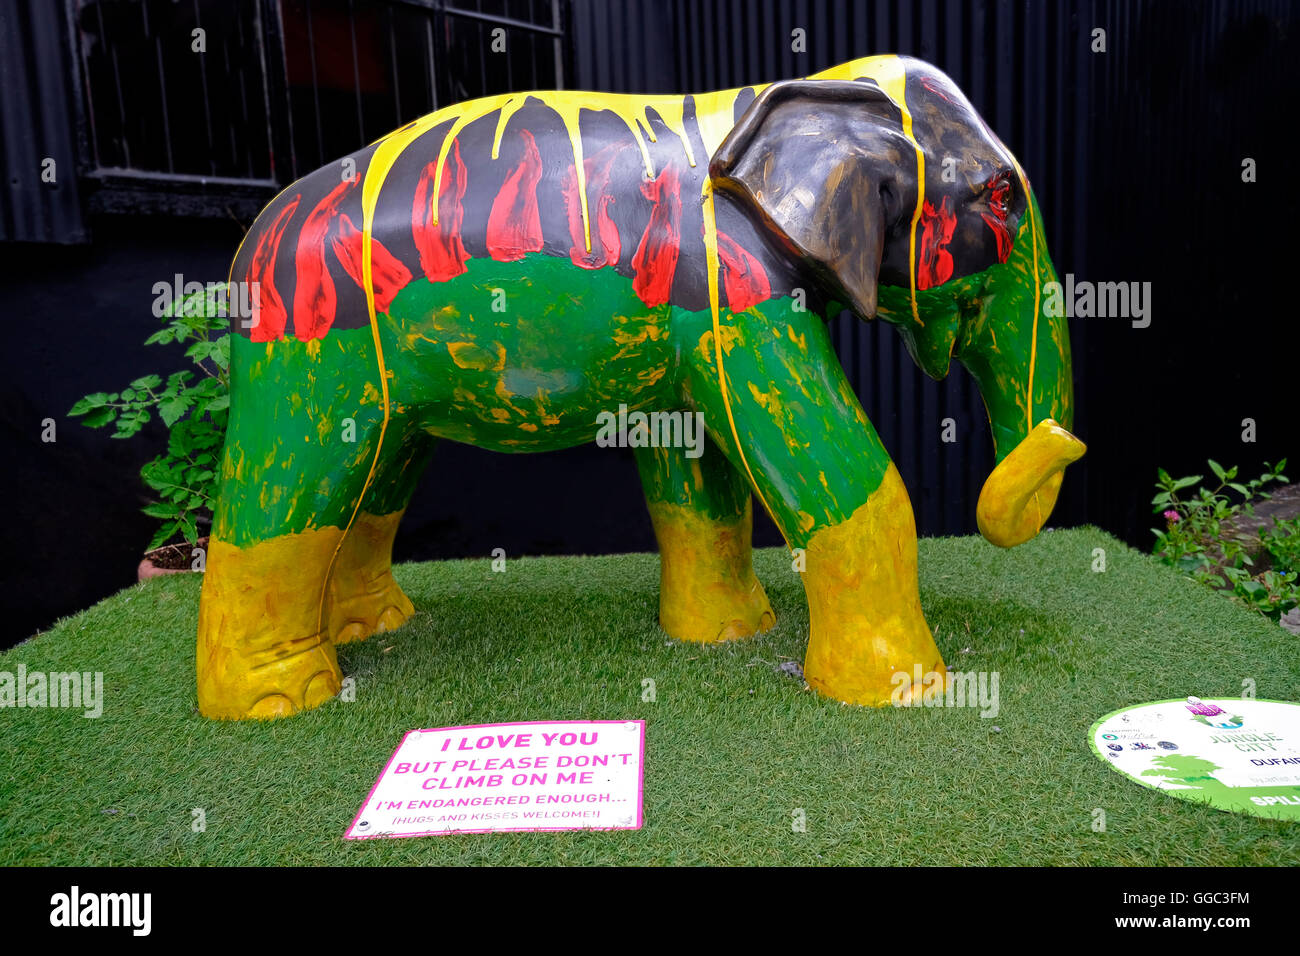 Model elephant in vivid green yellowq and red colours used for a promotional advertisement in Clonakilty co. Cork Ireland Stock Photo